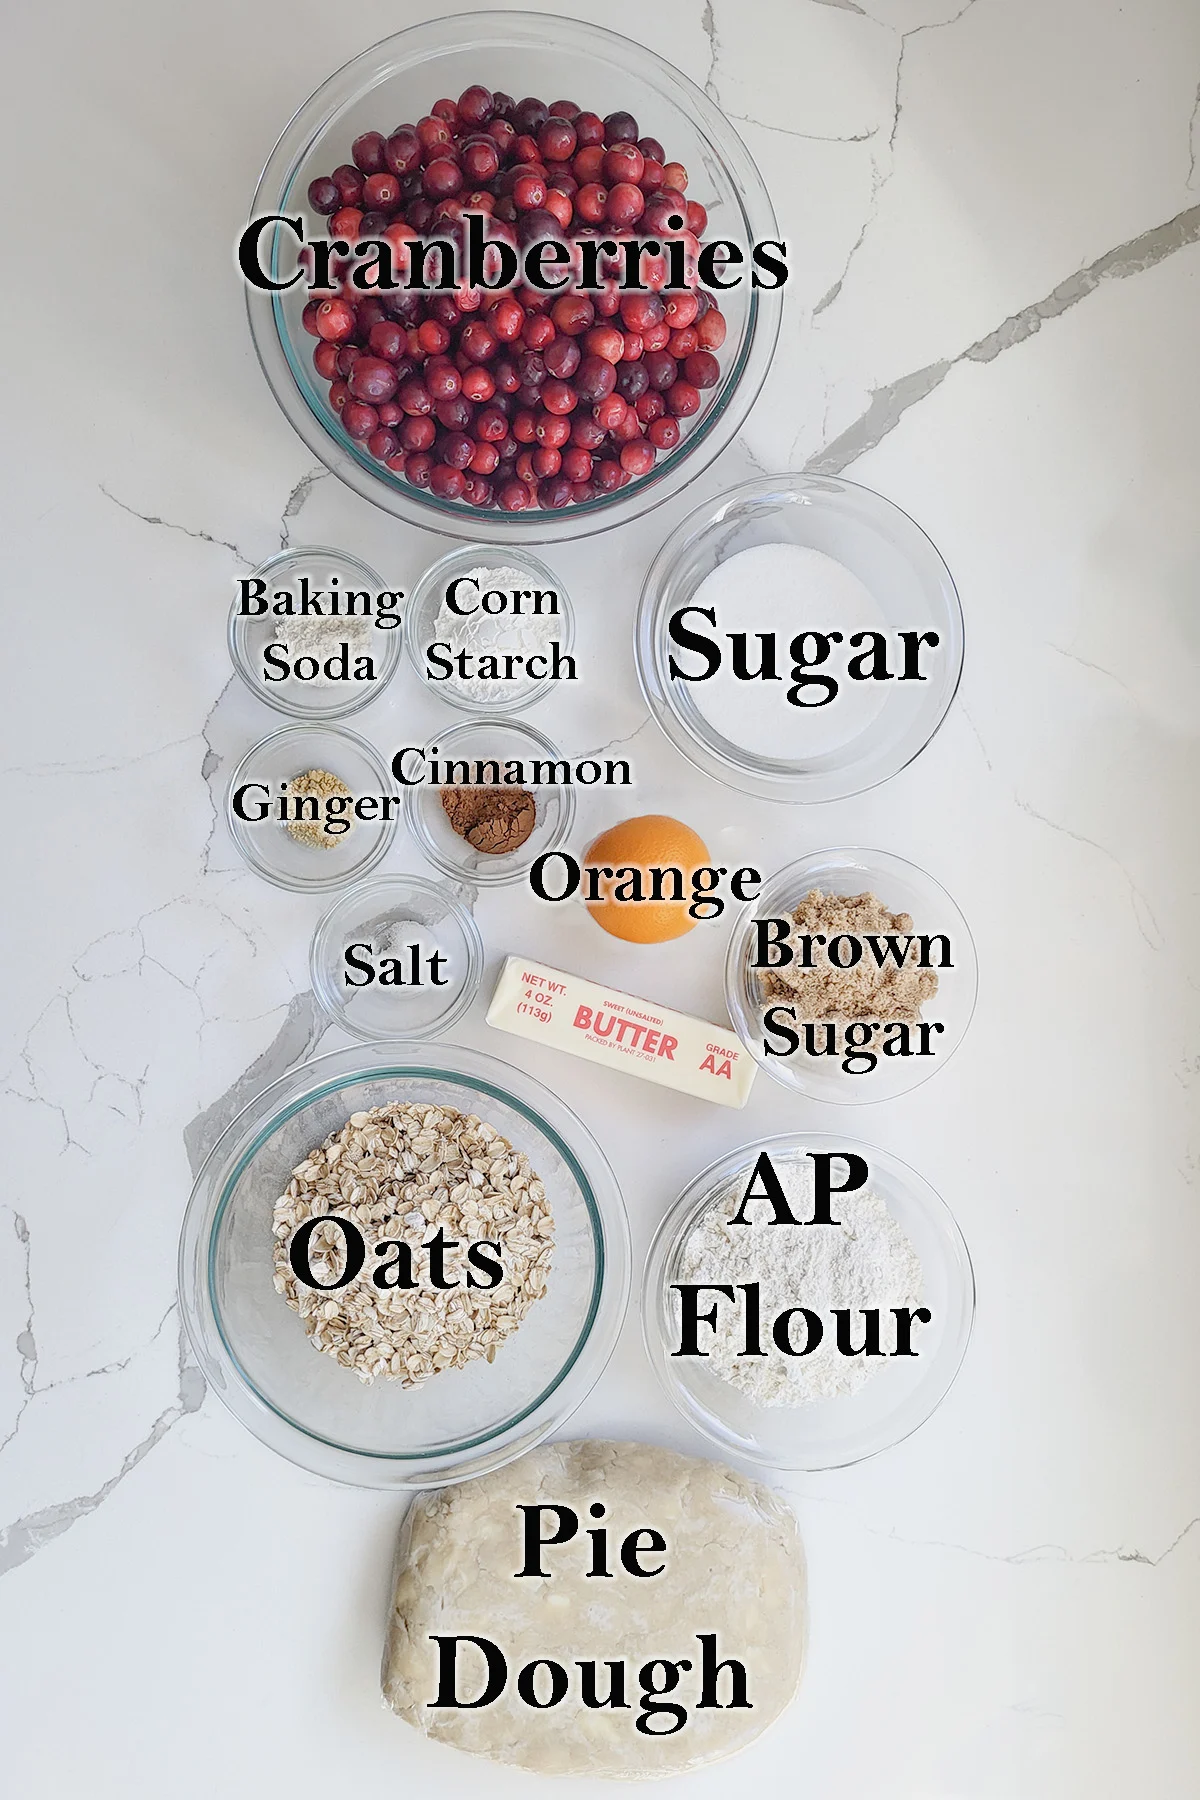 ingredients for cranberry crumb pie in glass bowls on a white surface.